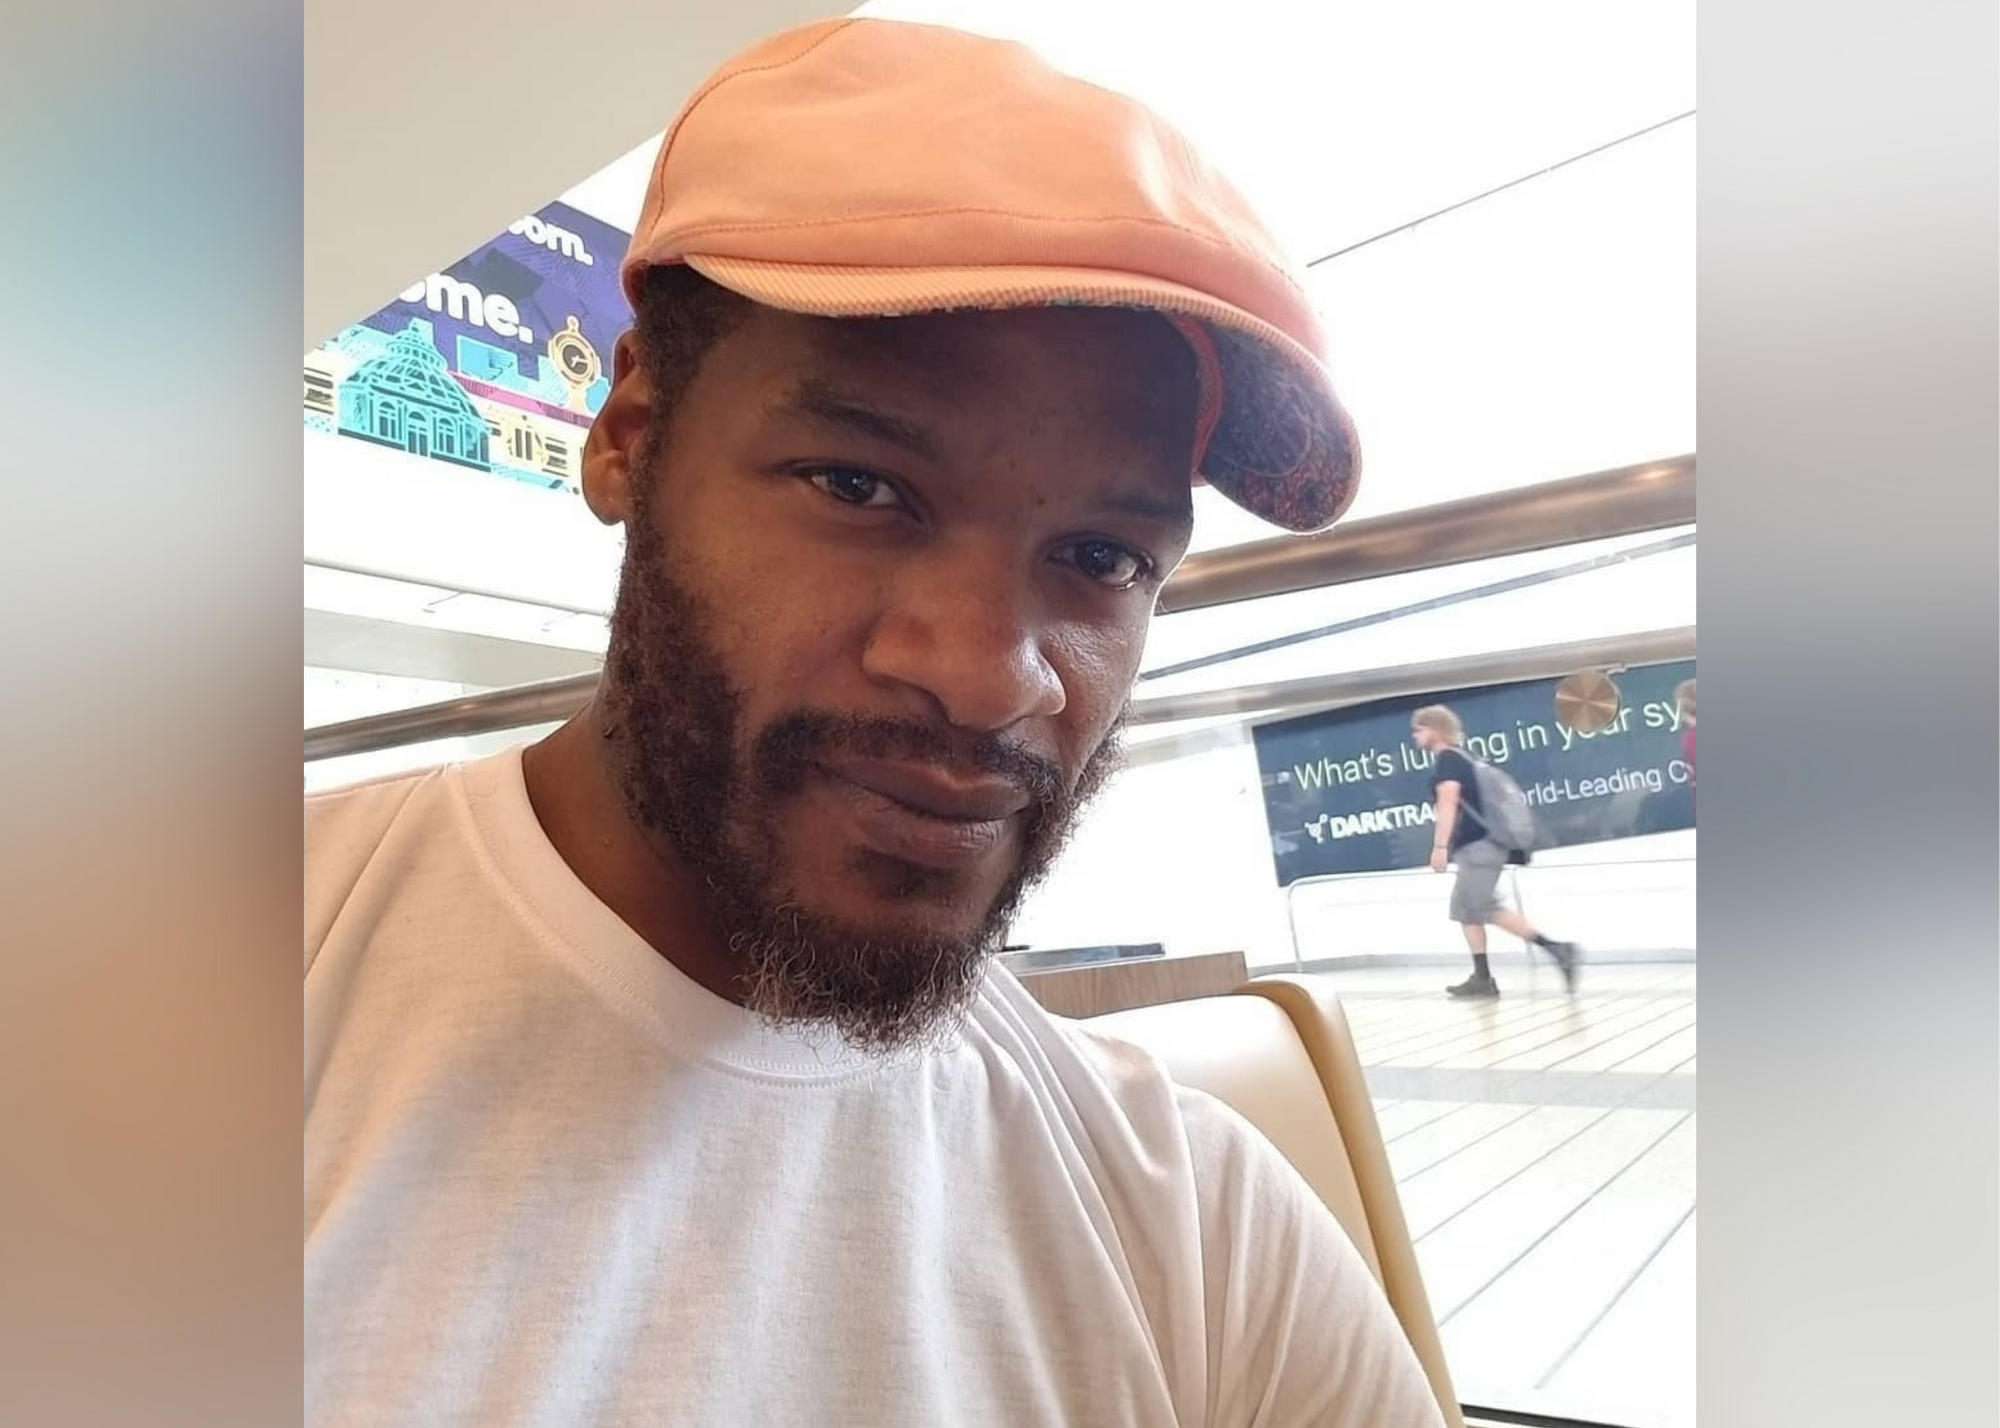 Singer Jaheim Arrested For Animal Cruelty, Accused of Starving 15 Dogs, 1 Dead